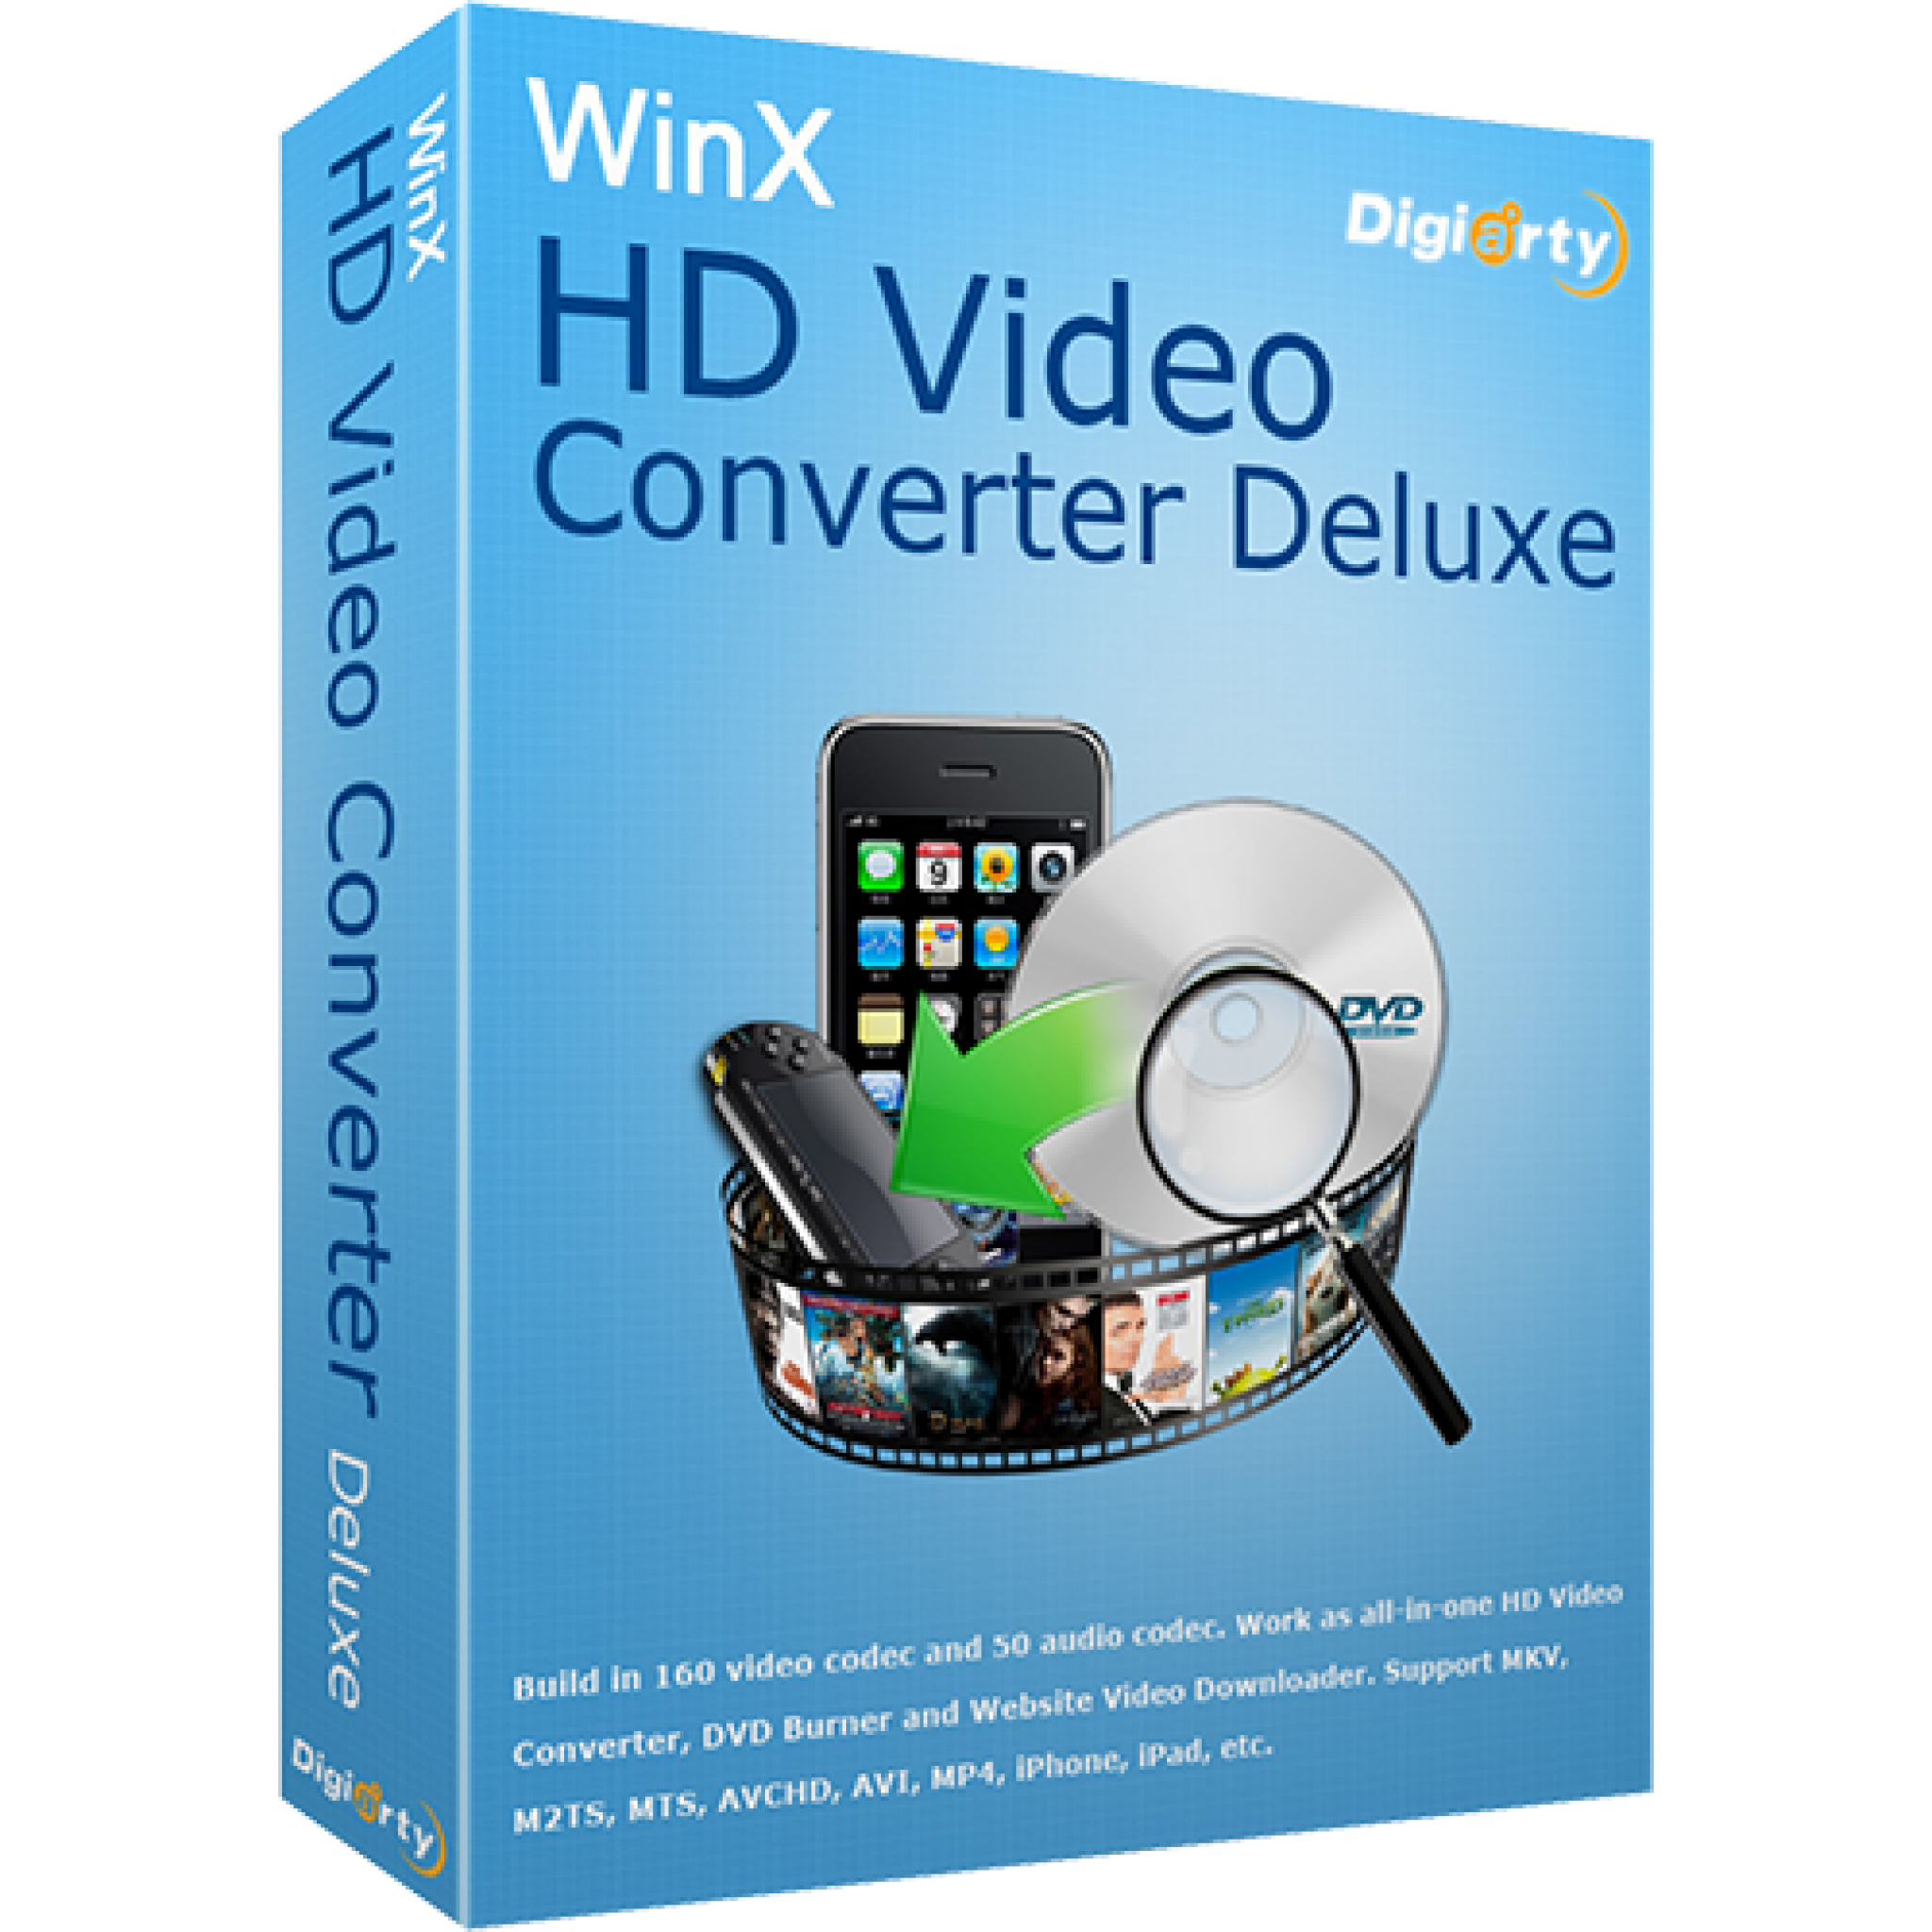 WinX HD Video Converter Deluxe 5.18.1.342 for ios download free